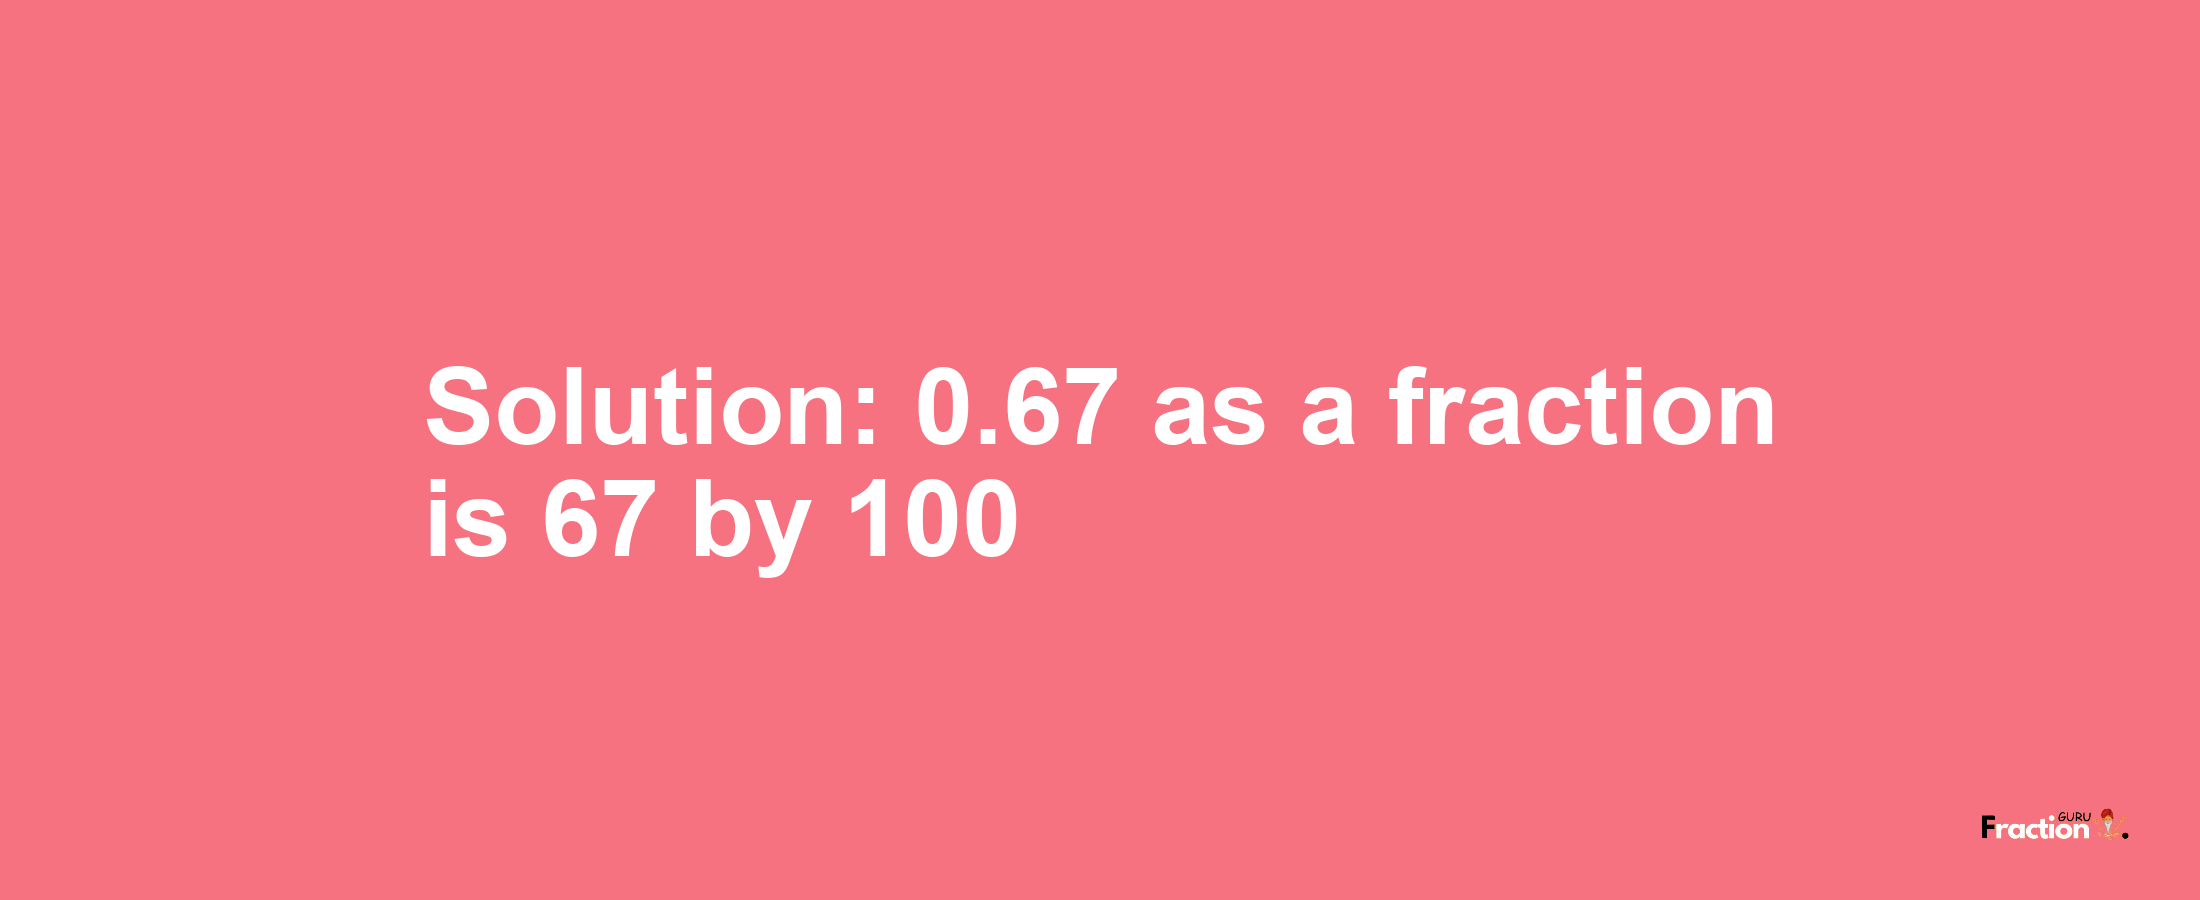 Solution:0.67 as a fraction is 67/100